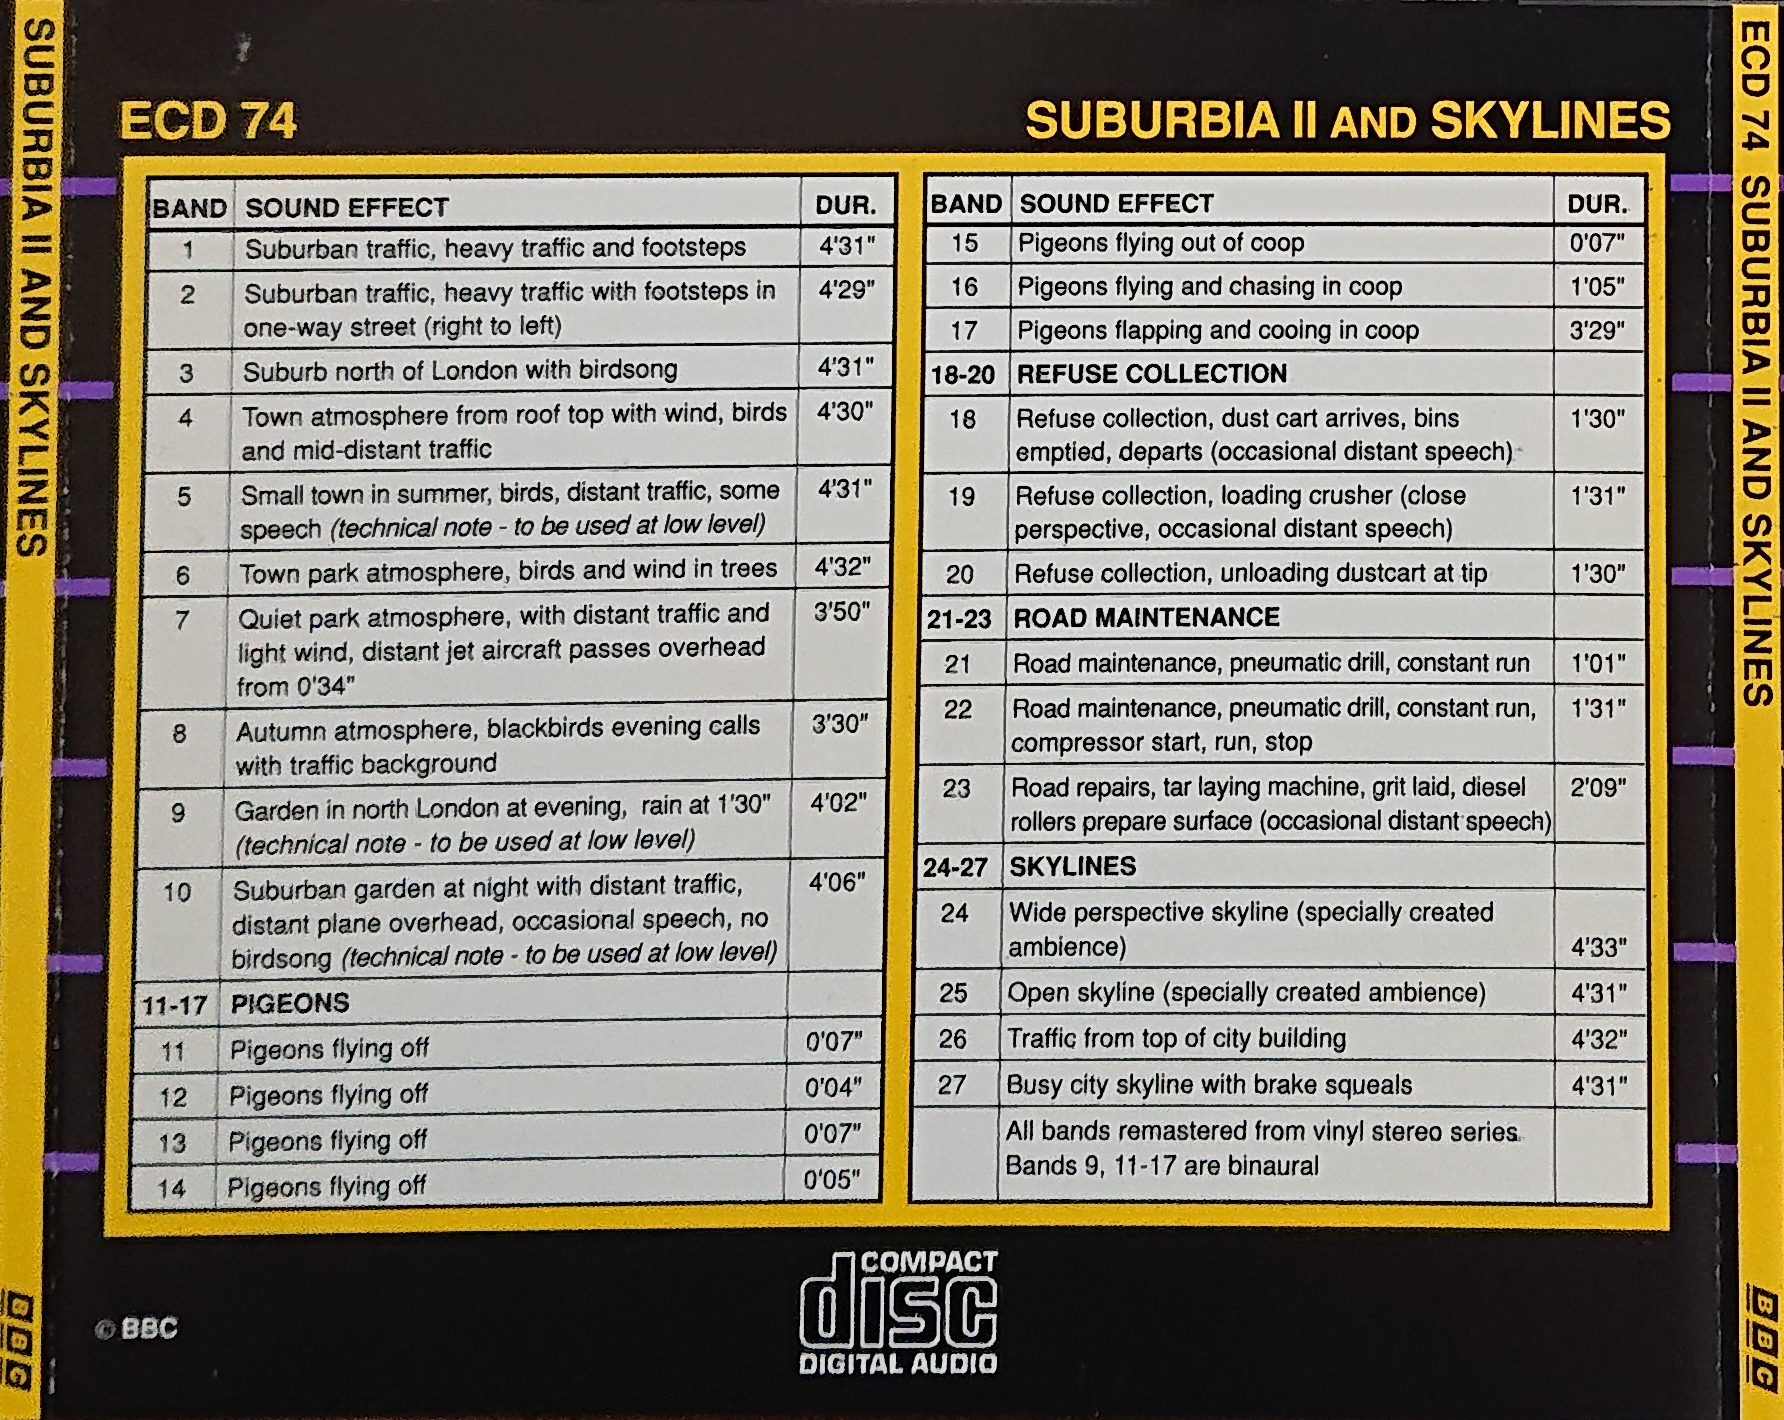 Picture of ECD 74 Suburbia II and skylines by artist Various from the BBC records and Tapes library